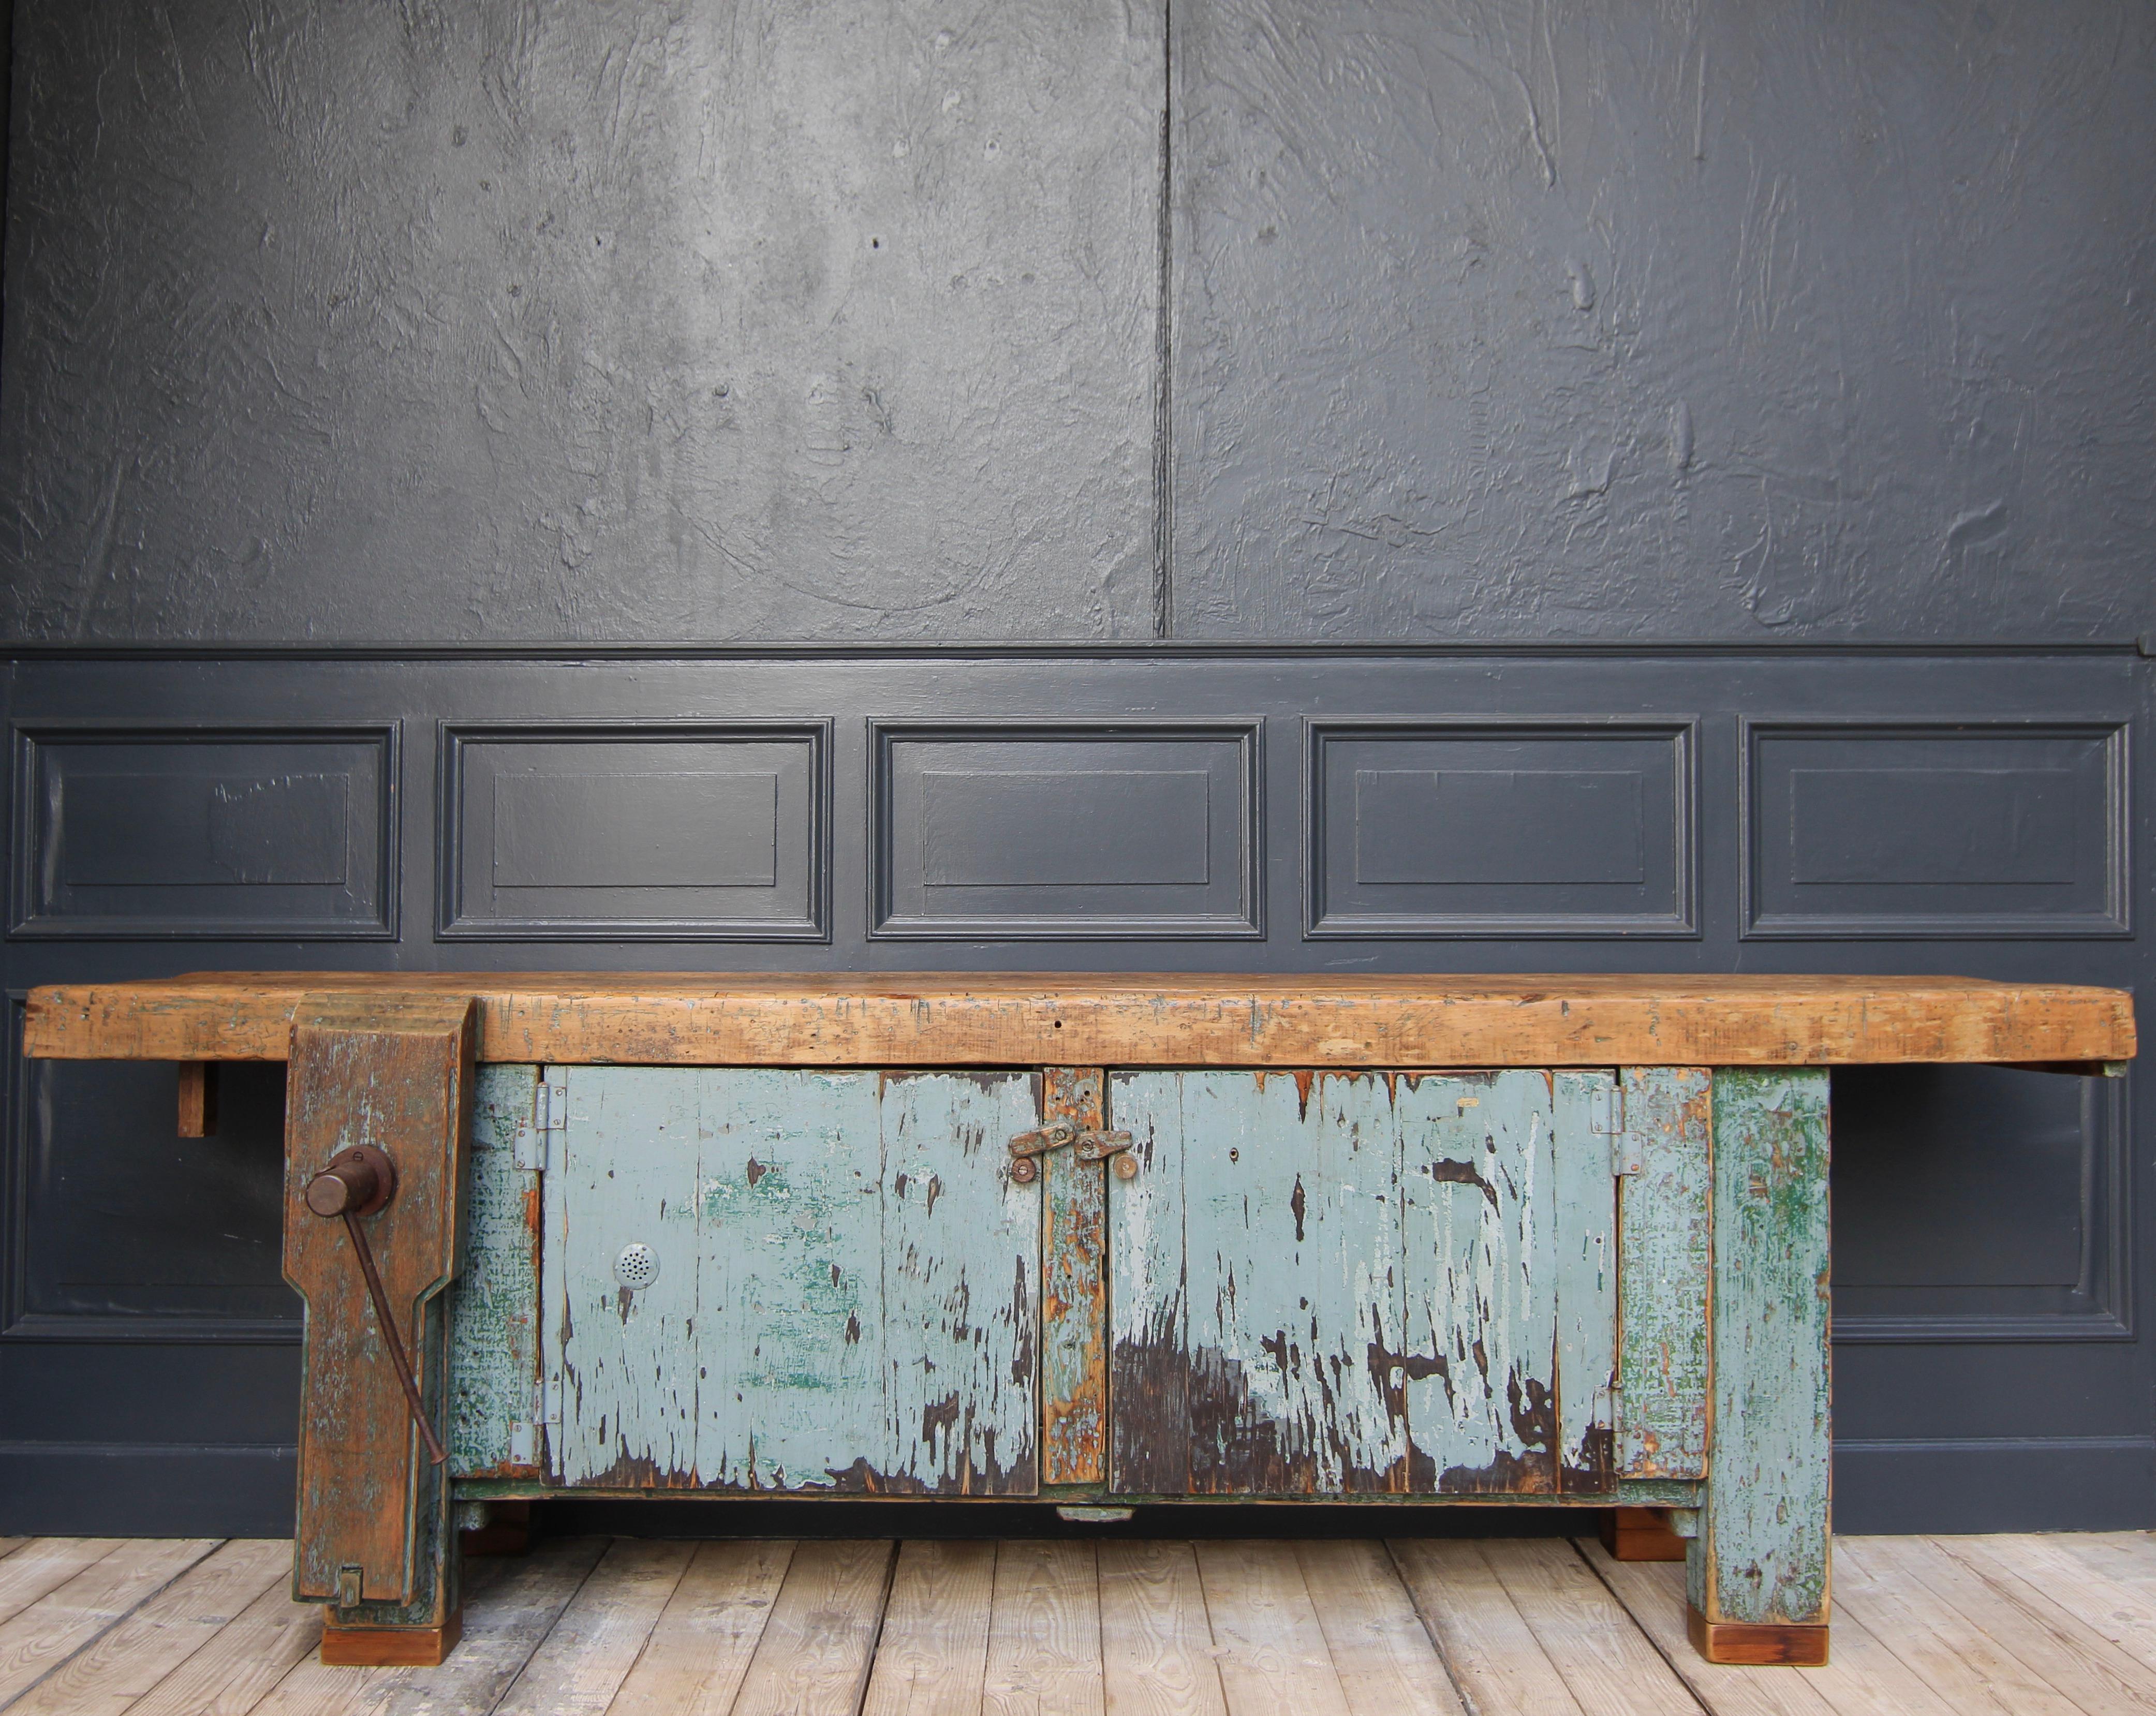 Large vintage workbench from the 1st half of the 20th century. Made of solid beech and pine wood. 

Two-door base cabinet with original patina and large vice at the front left. On top the solid beech wood worktop.

Dimensions: 
80.5 cm high / 31.69